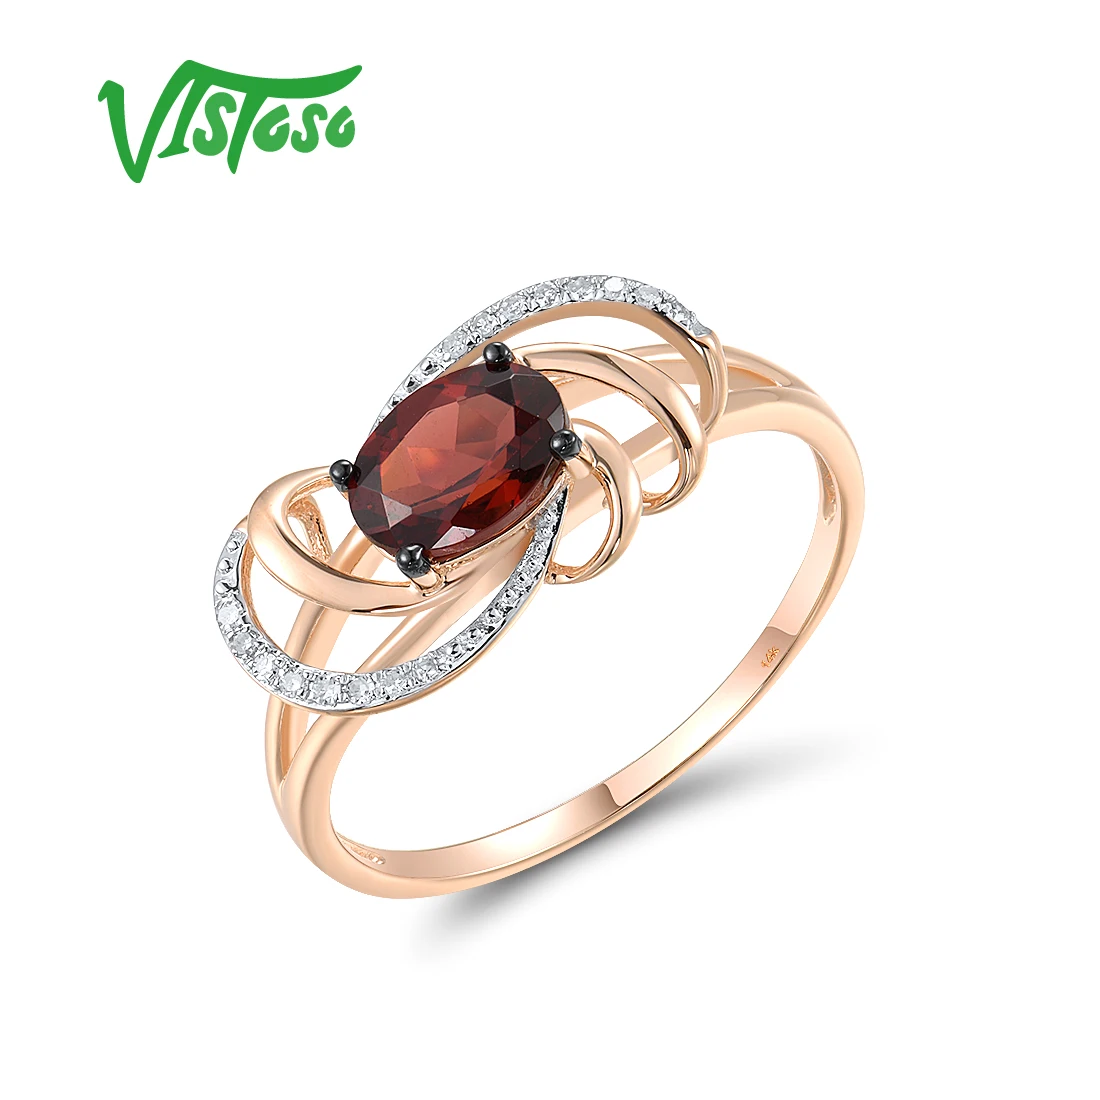 

VISTOSO Genuine Solitaire 14K 585 Rose Gold Ring For Women Real Diamond Red Garnet Linear Wedding Anniversary Fine Chic Jewelry